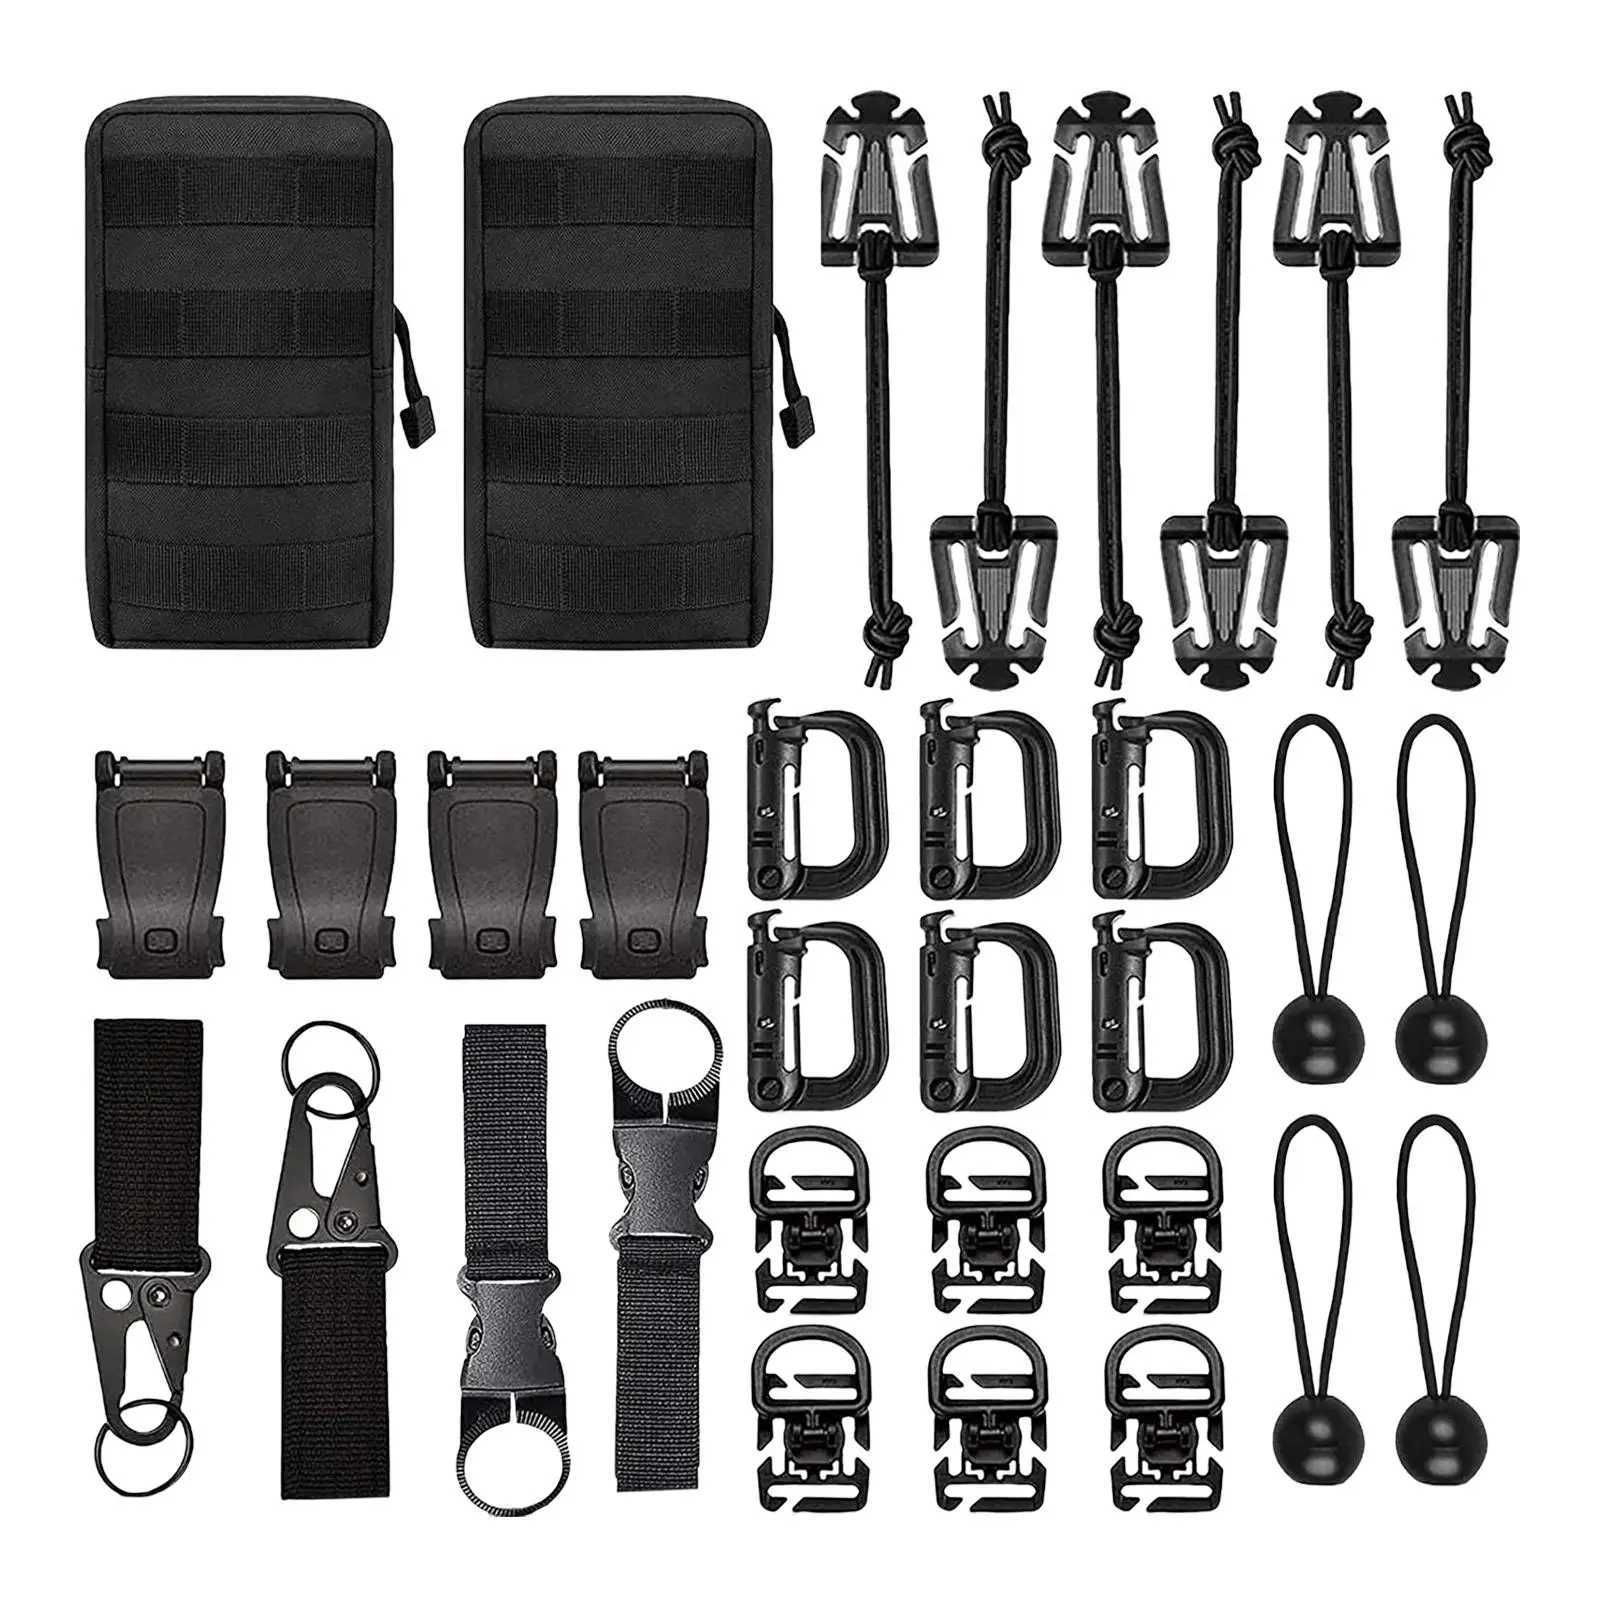 Molle Accessories Kit Attachments Webbing Strap Waist Bag Pouch for Climbing Riding